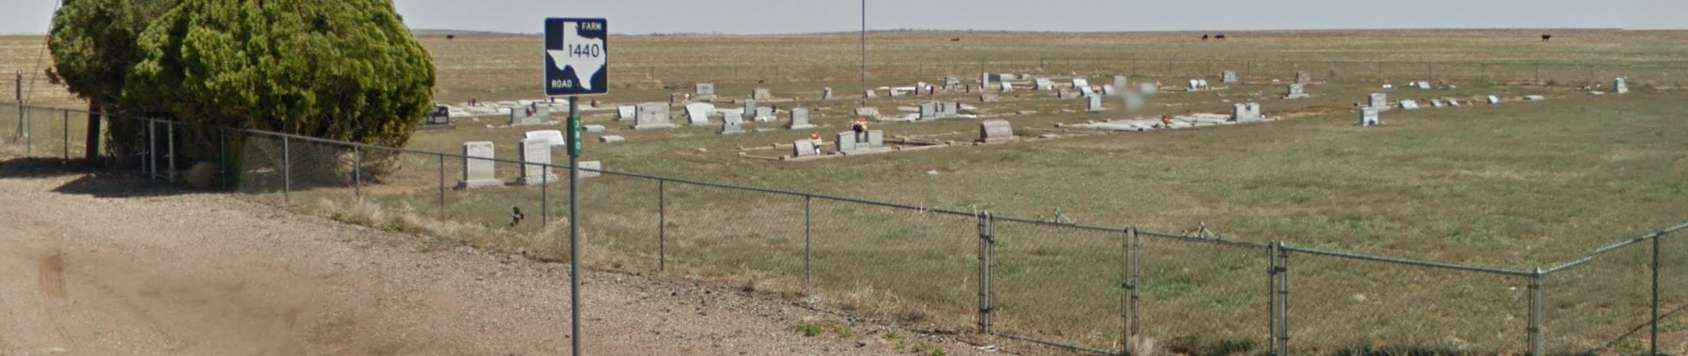 Haven of Rest Cemetery, Cottle County, Texas